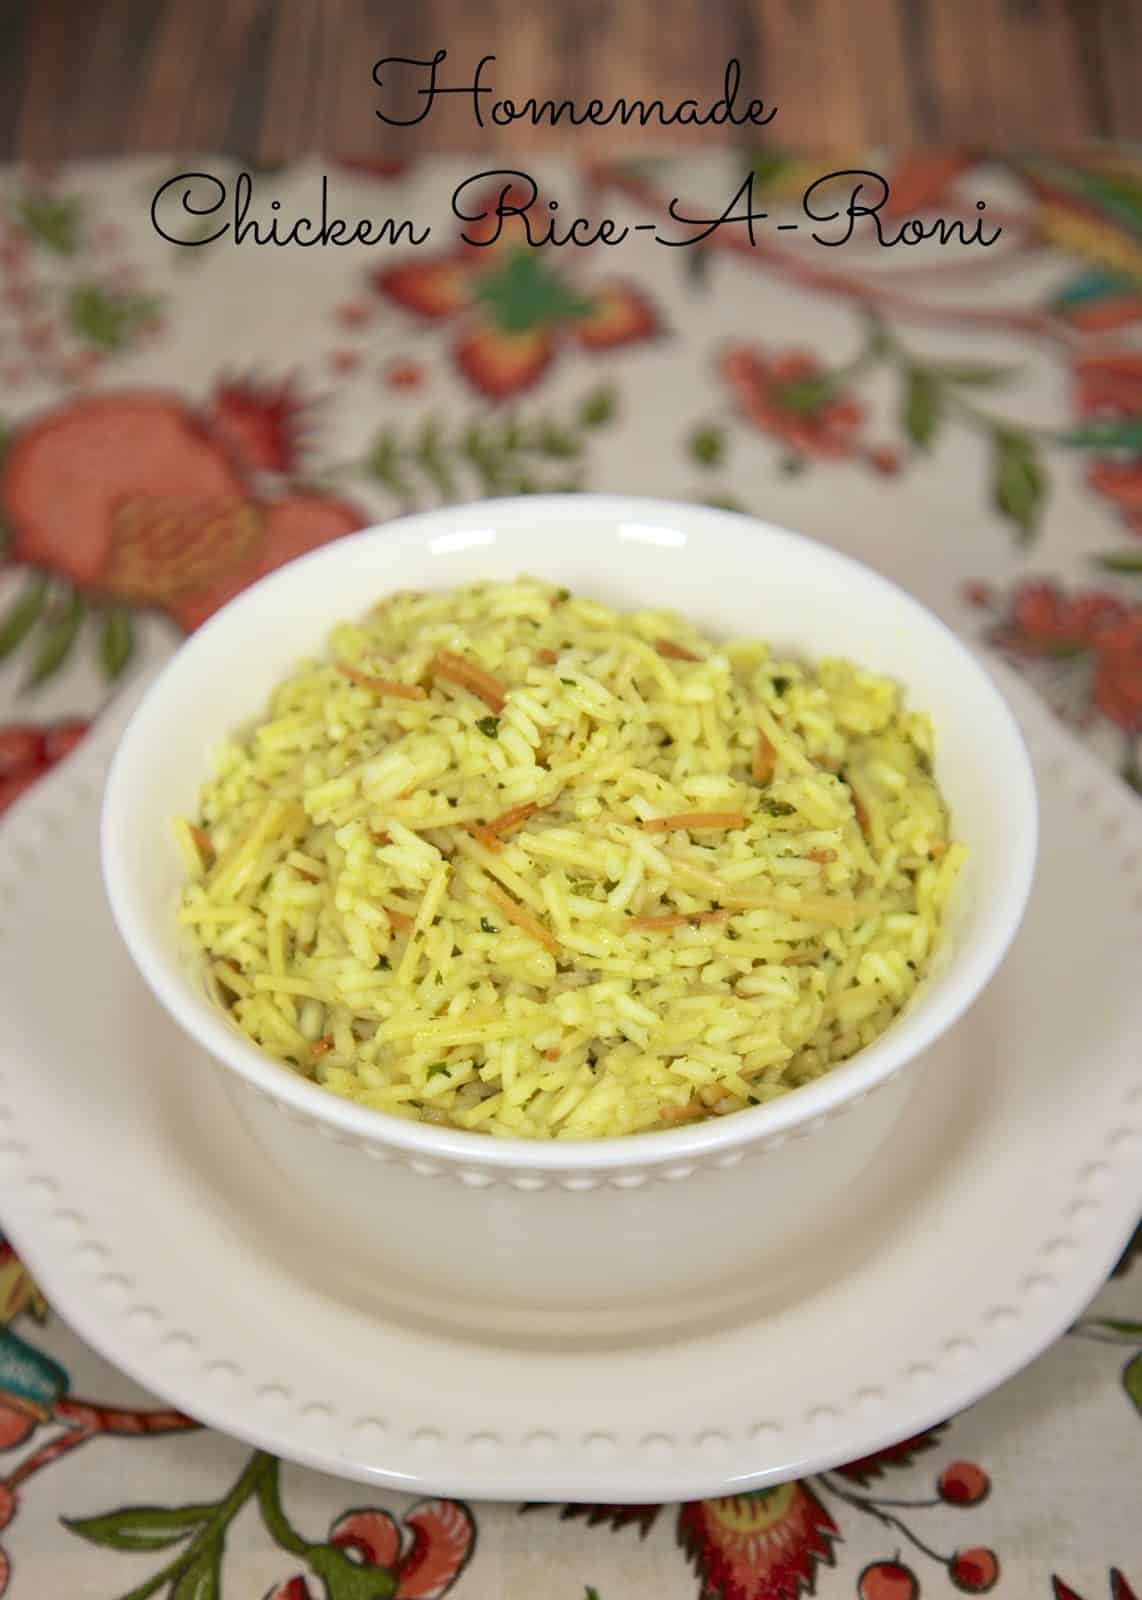 Homemade Chicken Rice-A-Roni Recipe - you'll never use the boxed stuff again! Rice, spaghetti, chicken bouillon, Italian seasoning, parsley, garlic powder. SO good and super easy to make. I like to mix up the ingredients and put into baggies for a quick side dish during the week.